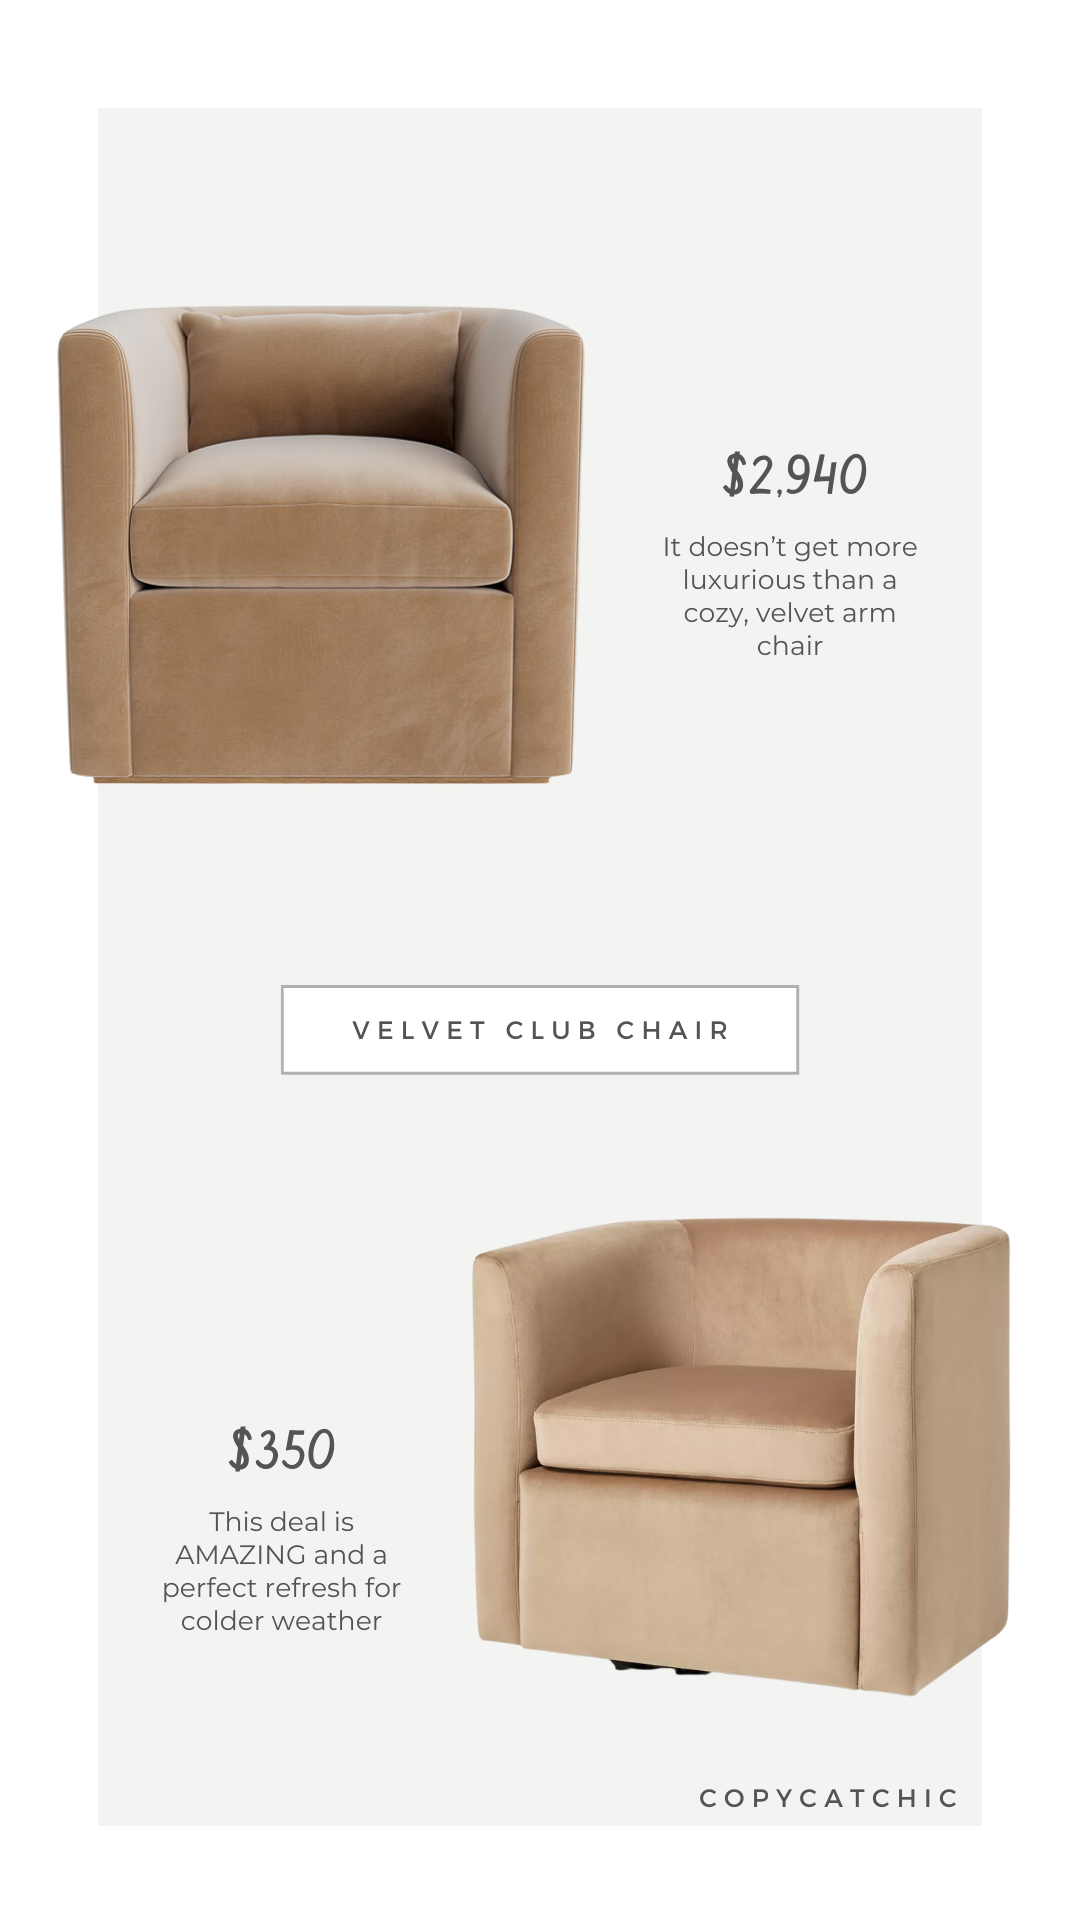 Look for Less: velvet club chair, McGee and Co Reese Curved Chair vs Target Vernon Upholstered Swivel Chair, daily find, dupe, copycatchic luxe living for less, budget home decor and design, daily dupes, home trends, sales, budget travel and room inspiration